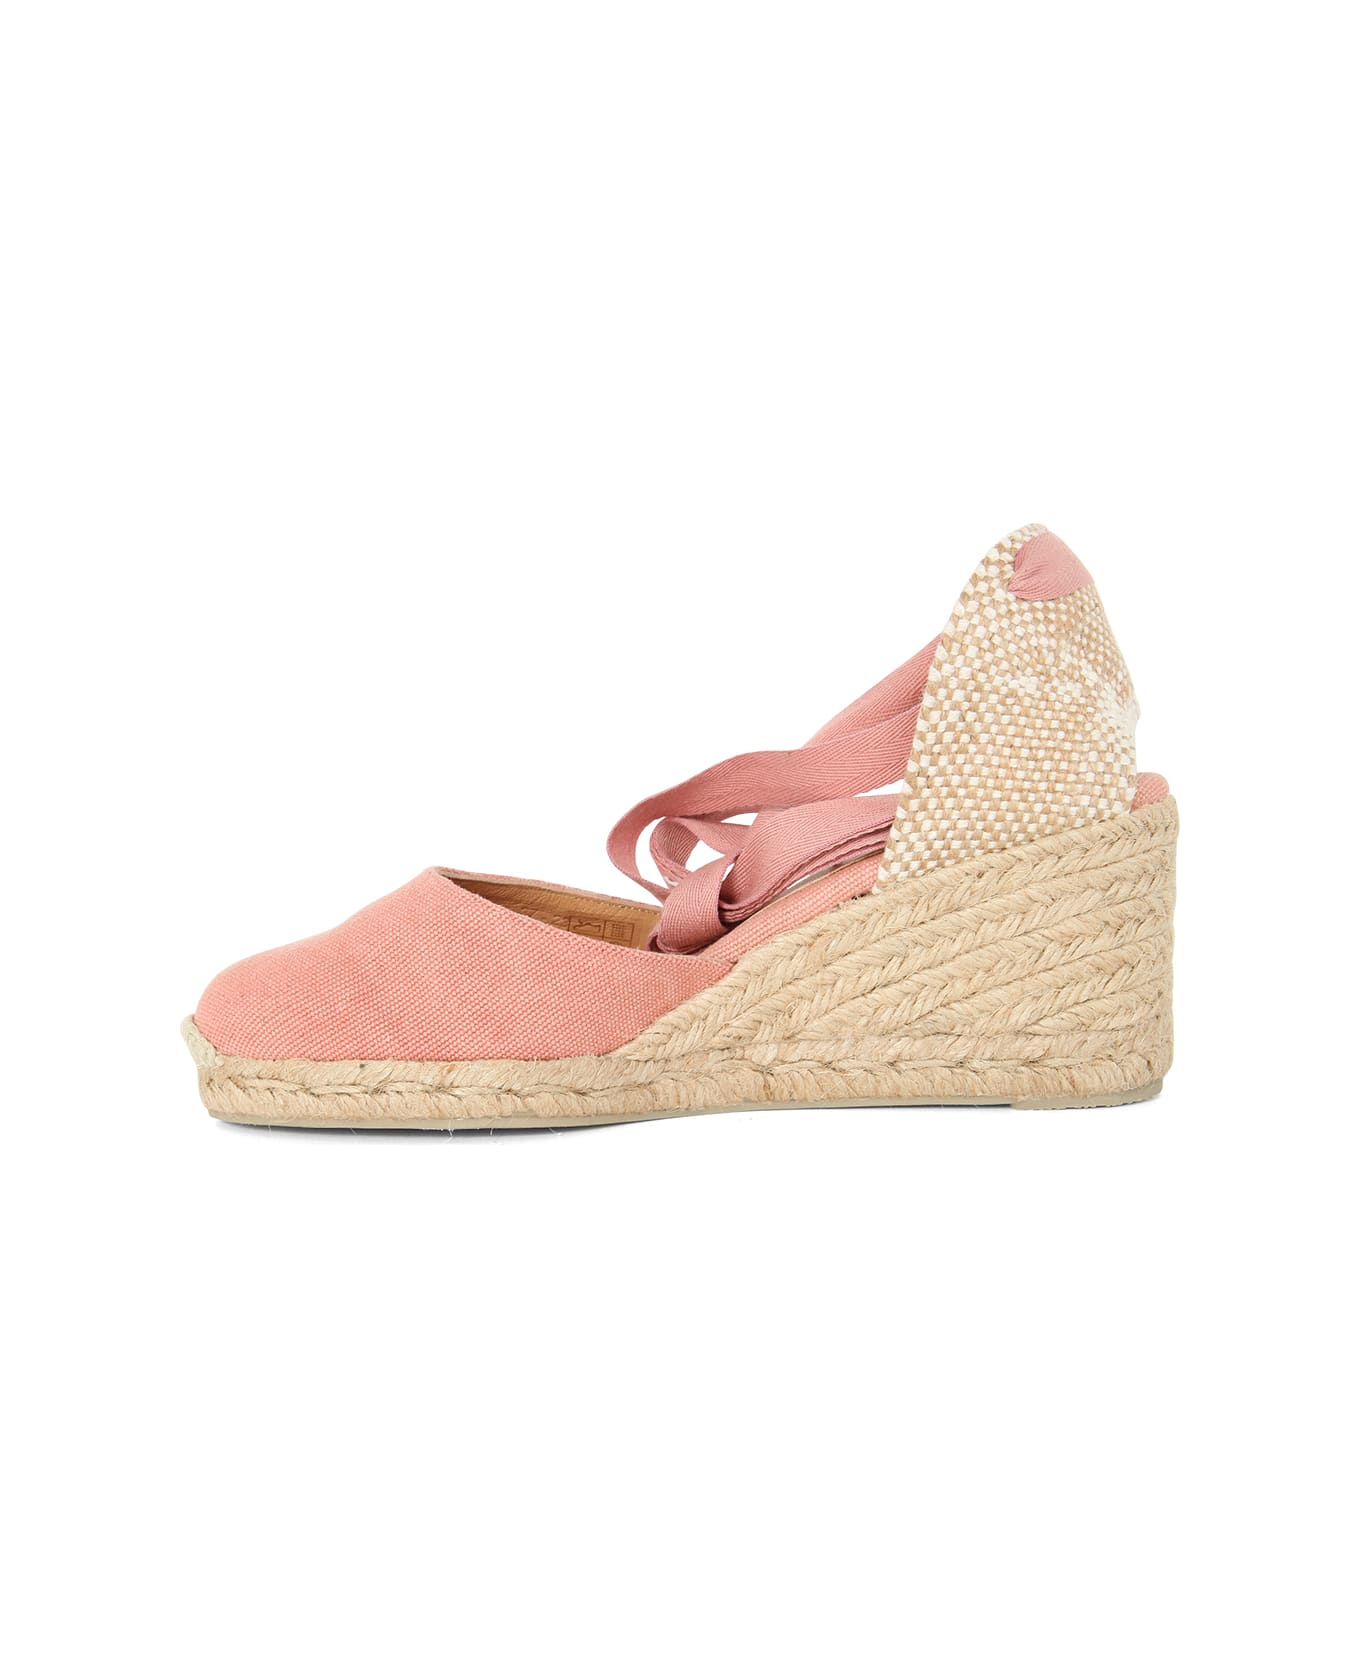 Castañer Carina Espadrilles Wedge Sandal With Ankle Laces - Pink ウェッジシューズ